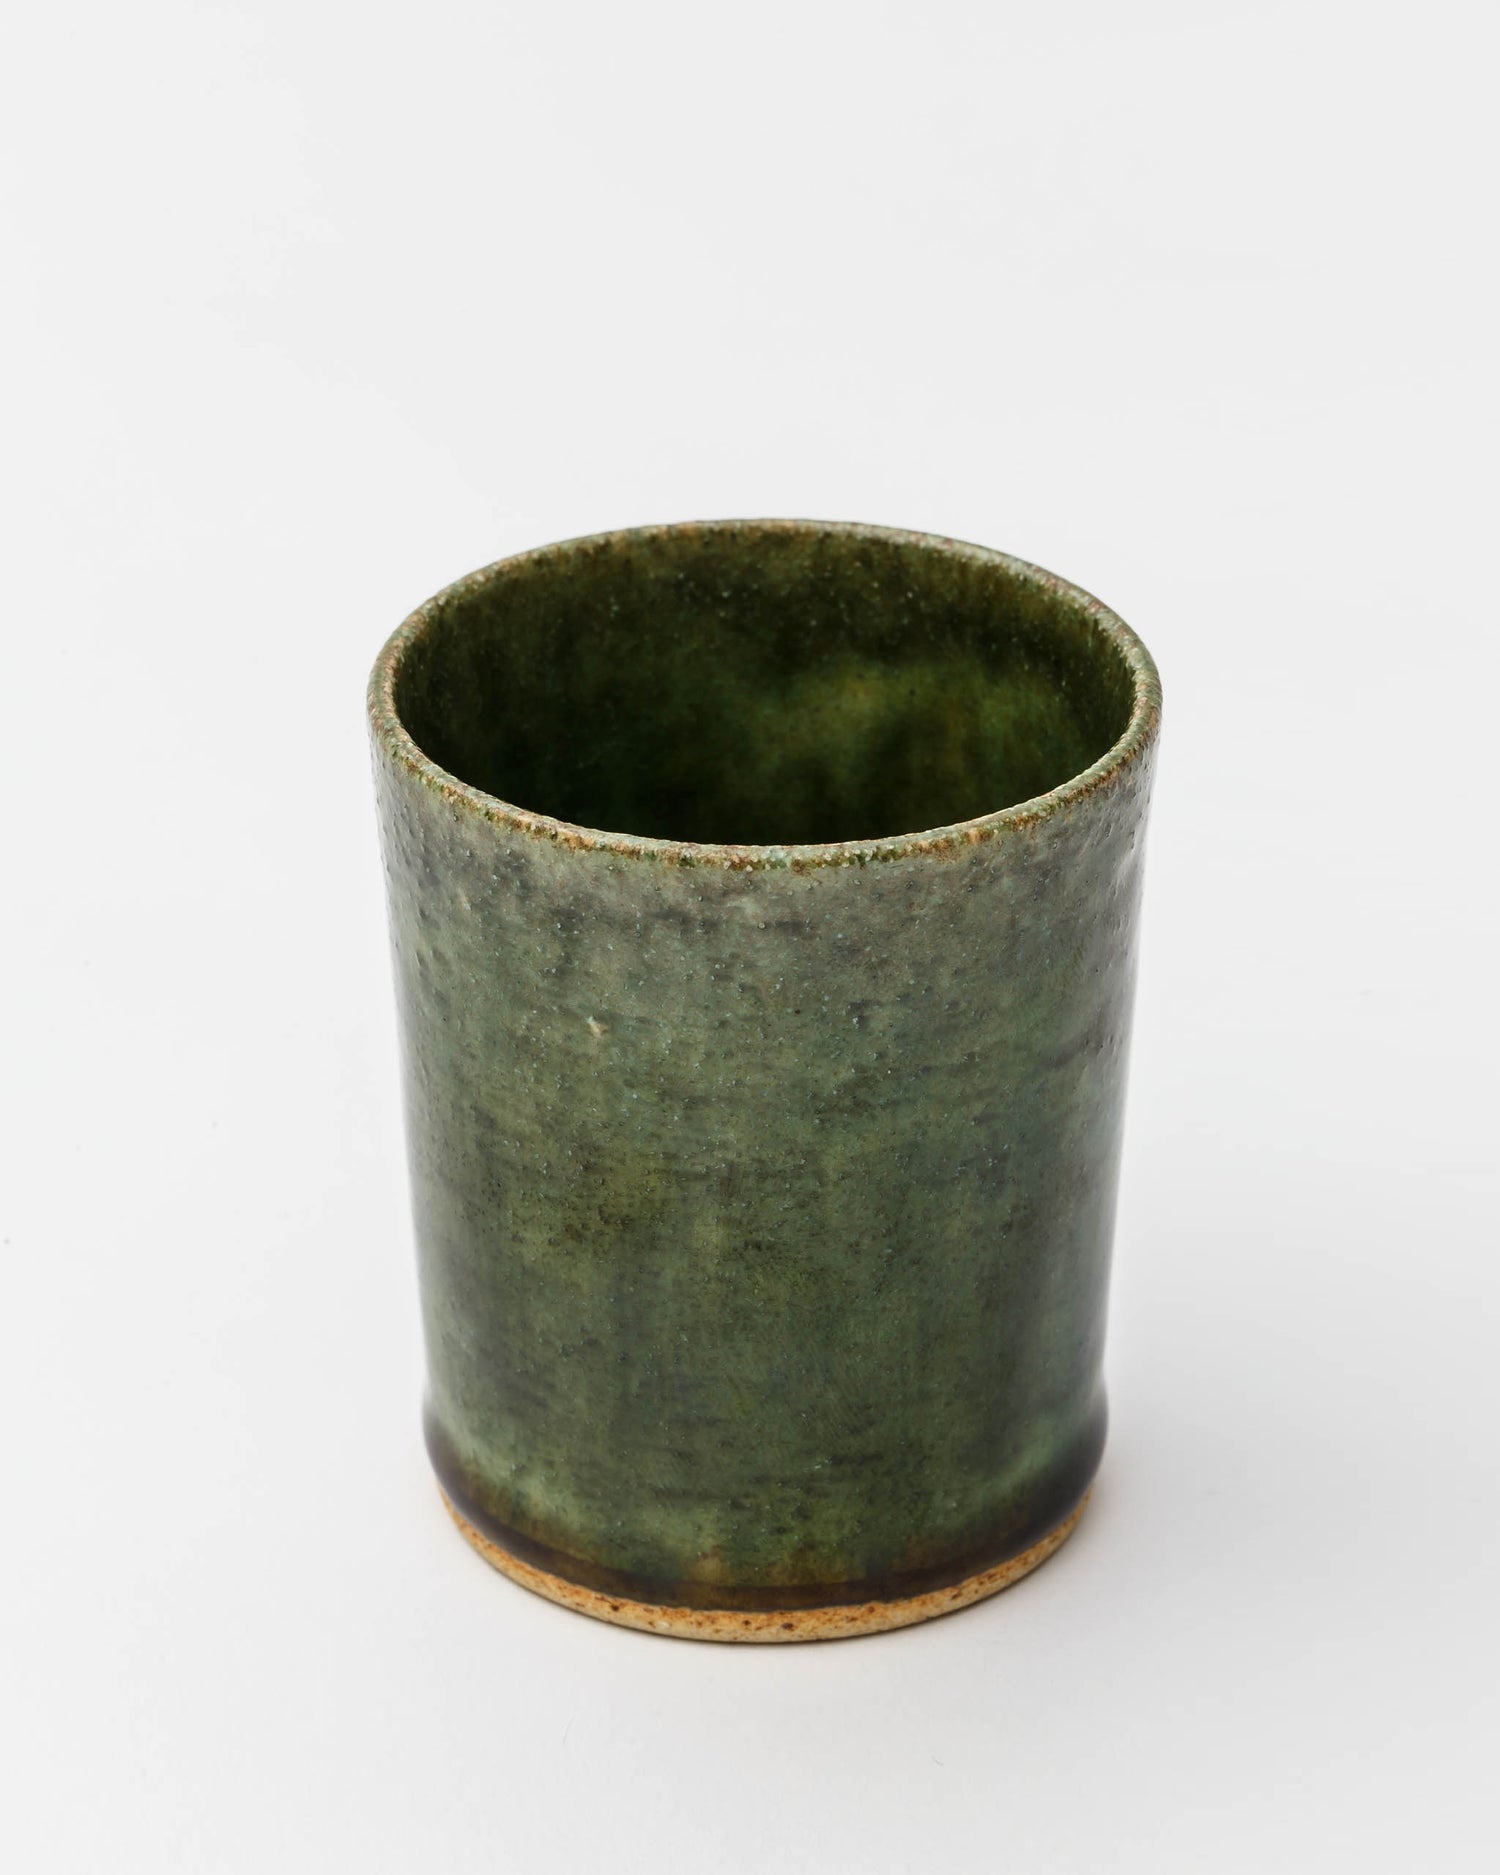 Overhead image looking into ceramic oribe drinking vessel with deep green glaze by Time and Style against white-gray background.